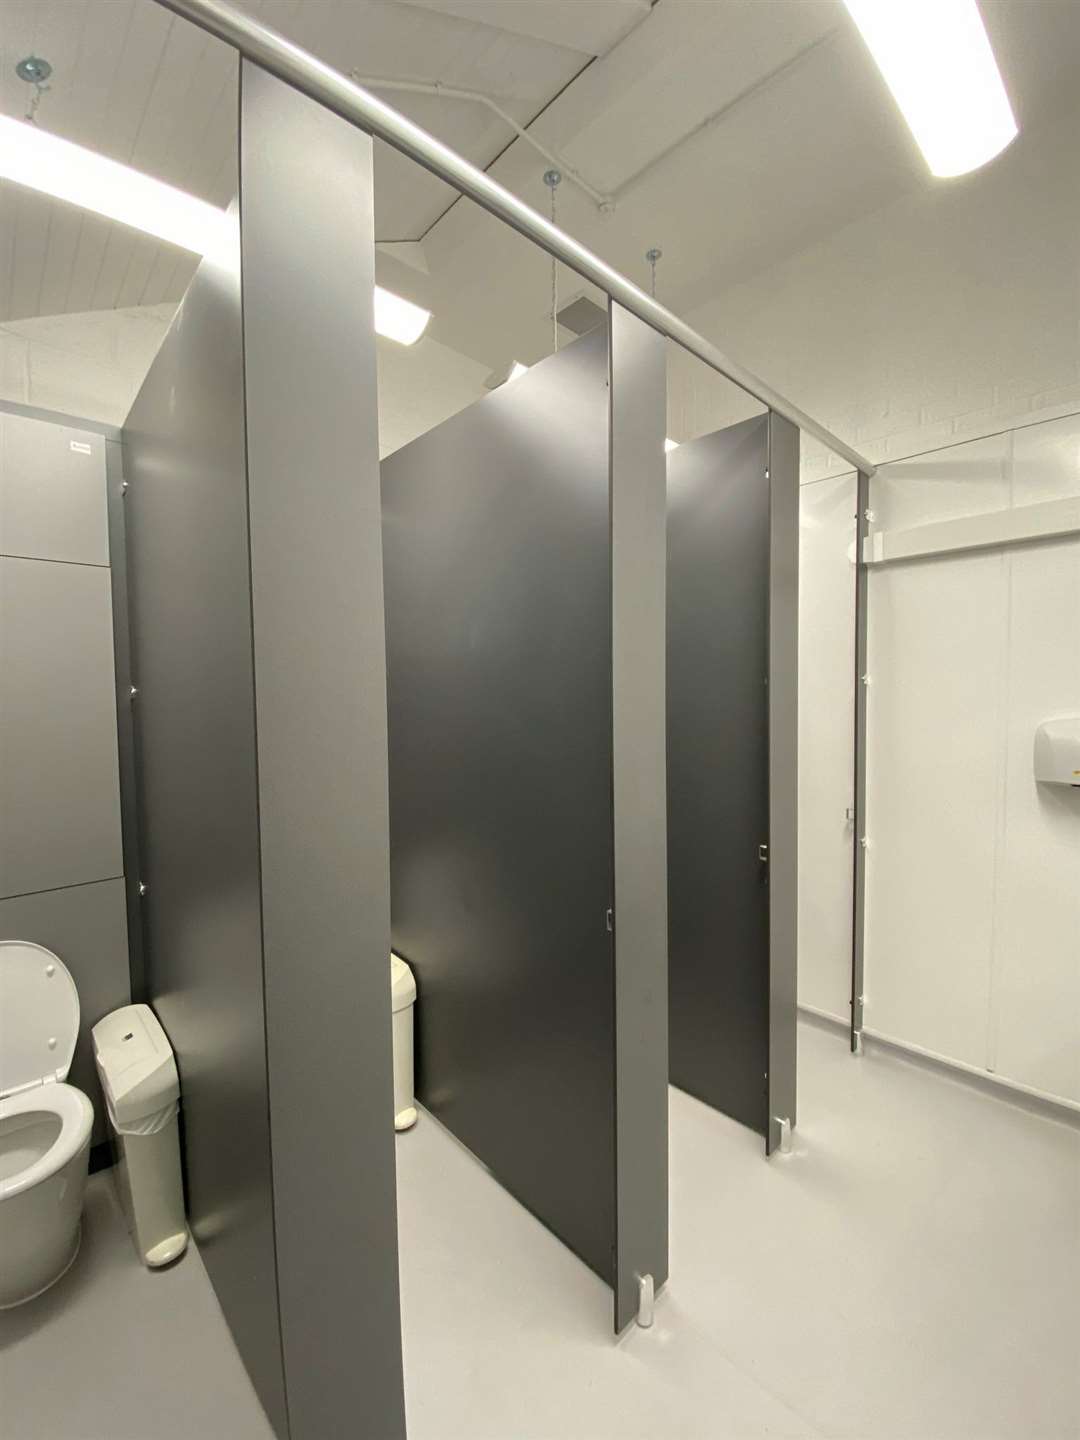 The toilets cost more than £50,000 to refurbish. Picture: Babergh District Council